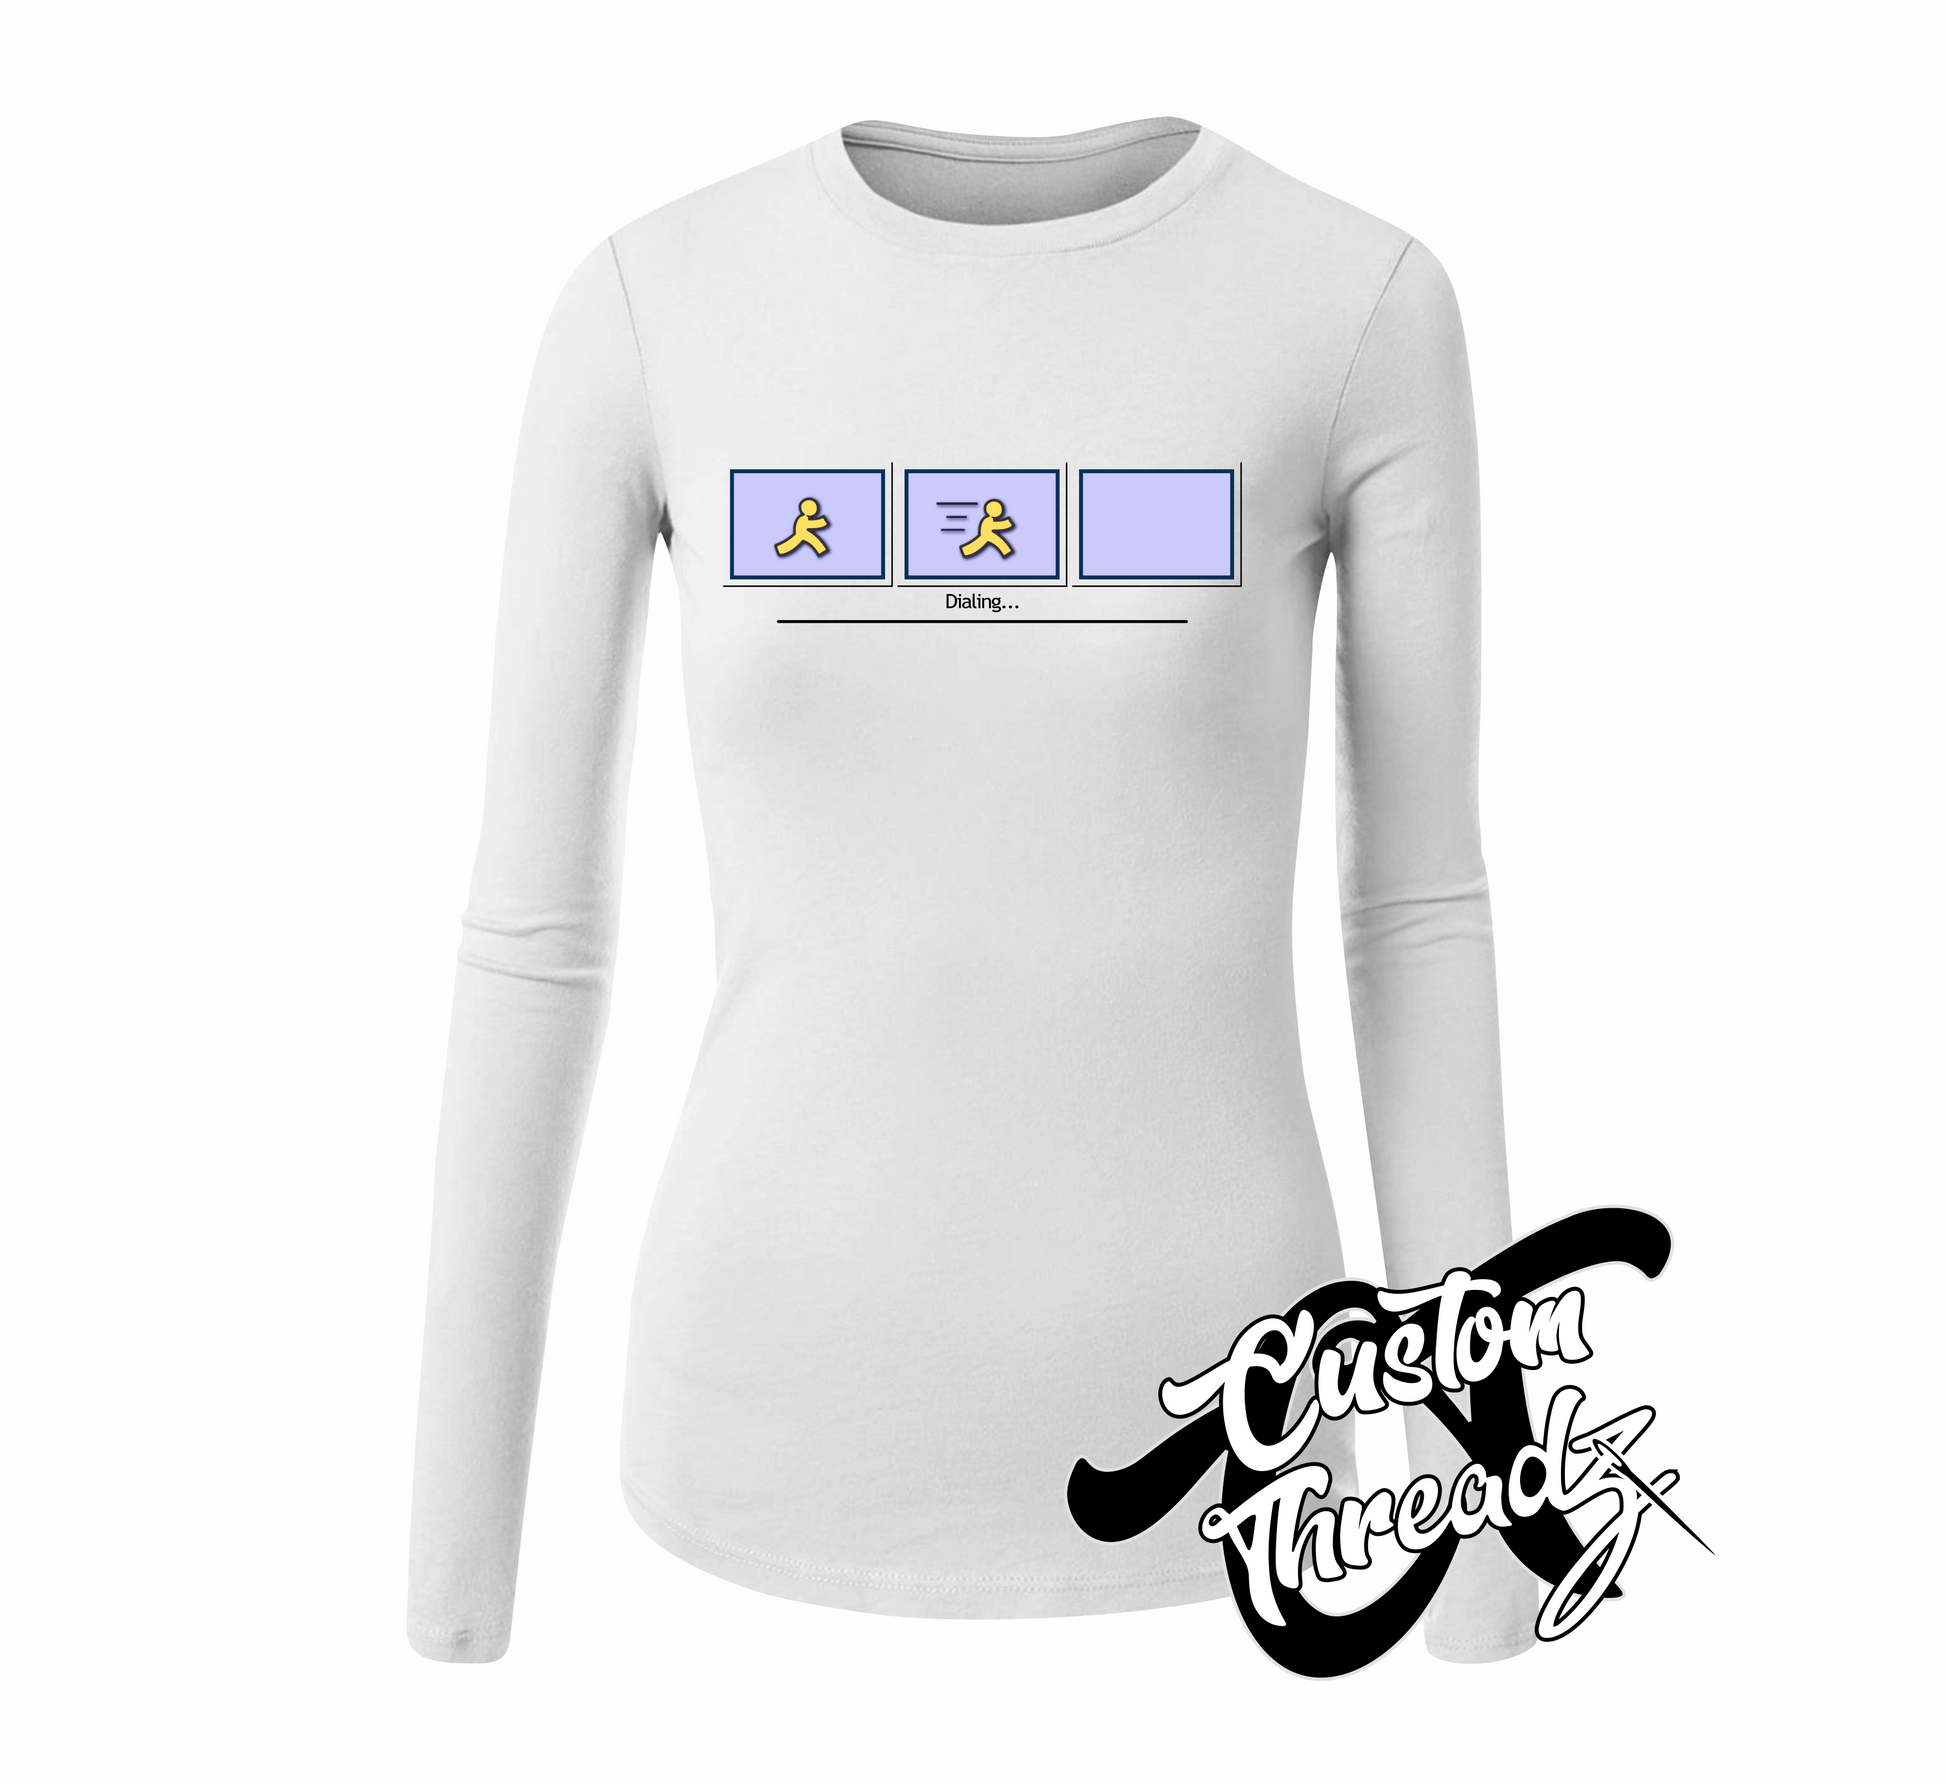 white long sleeve tee with AOL dial up DTG printed design